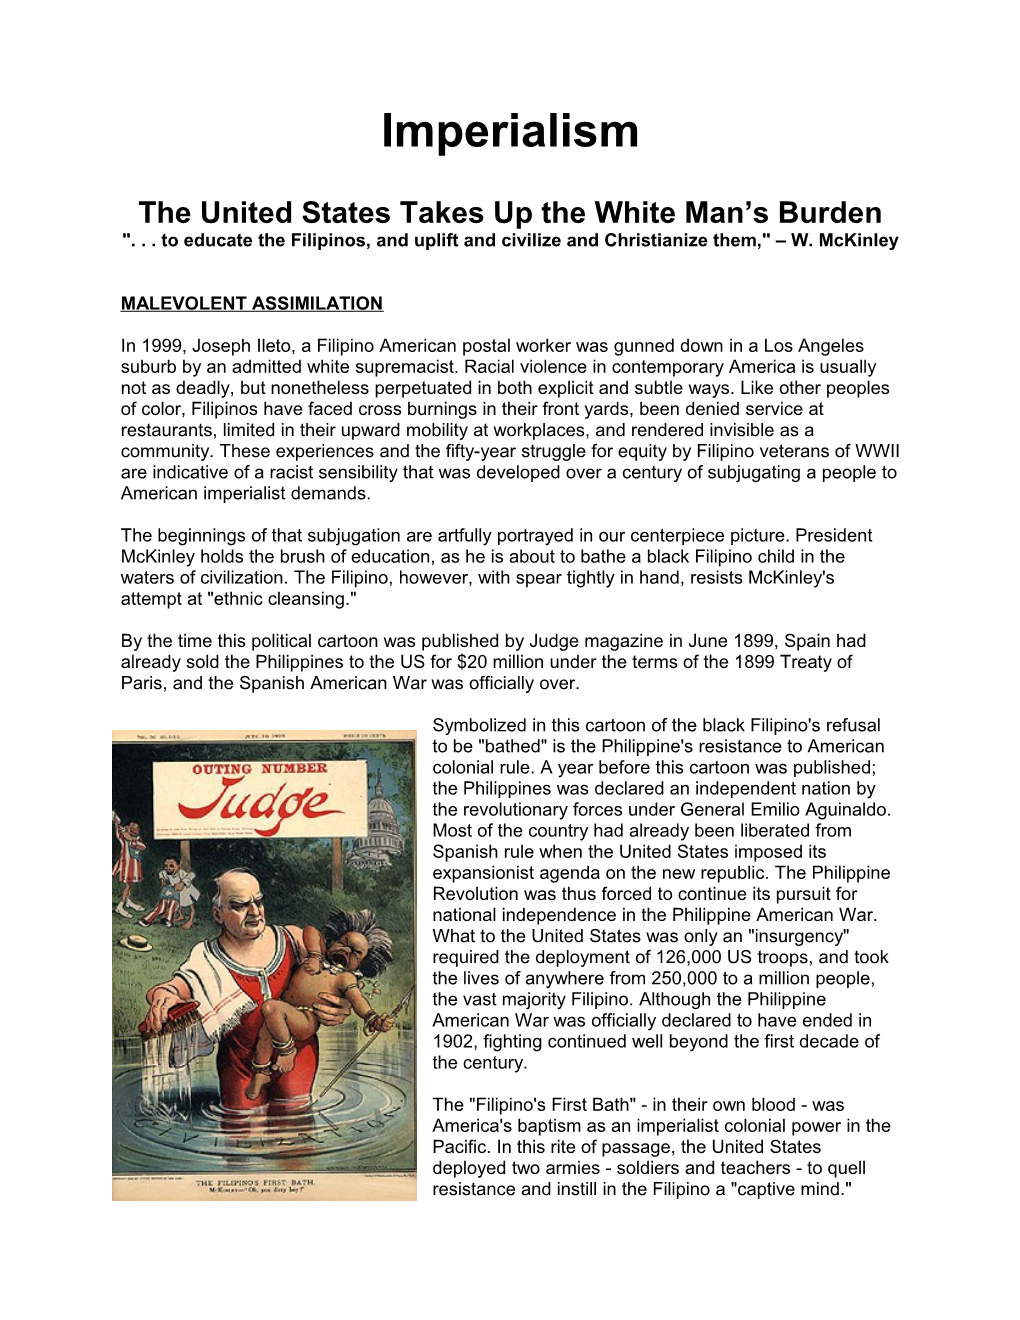 The United States Takes up the White Man S Burden